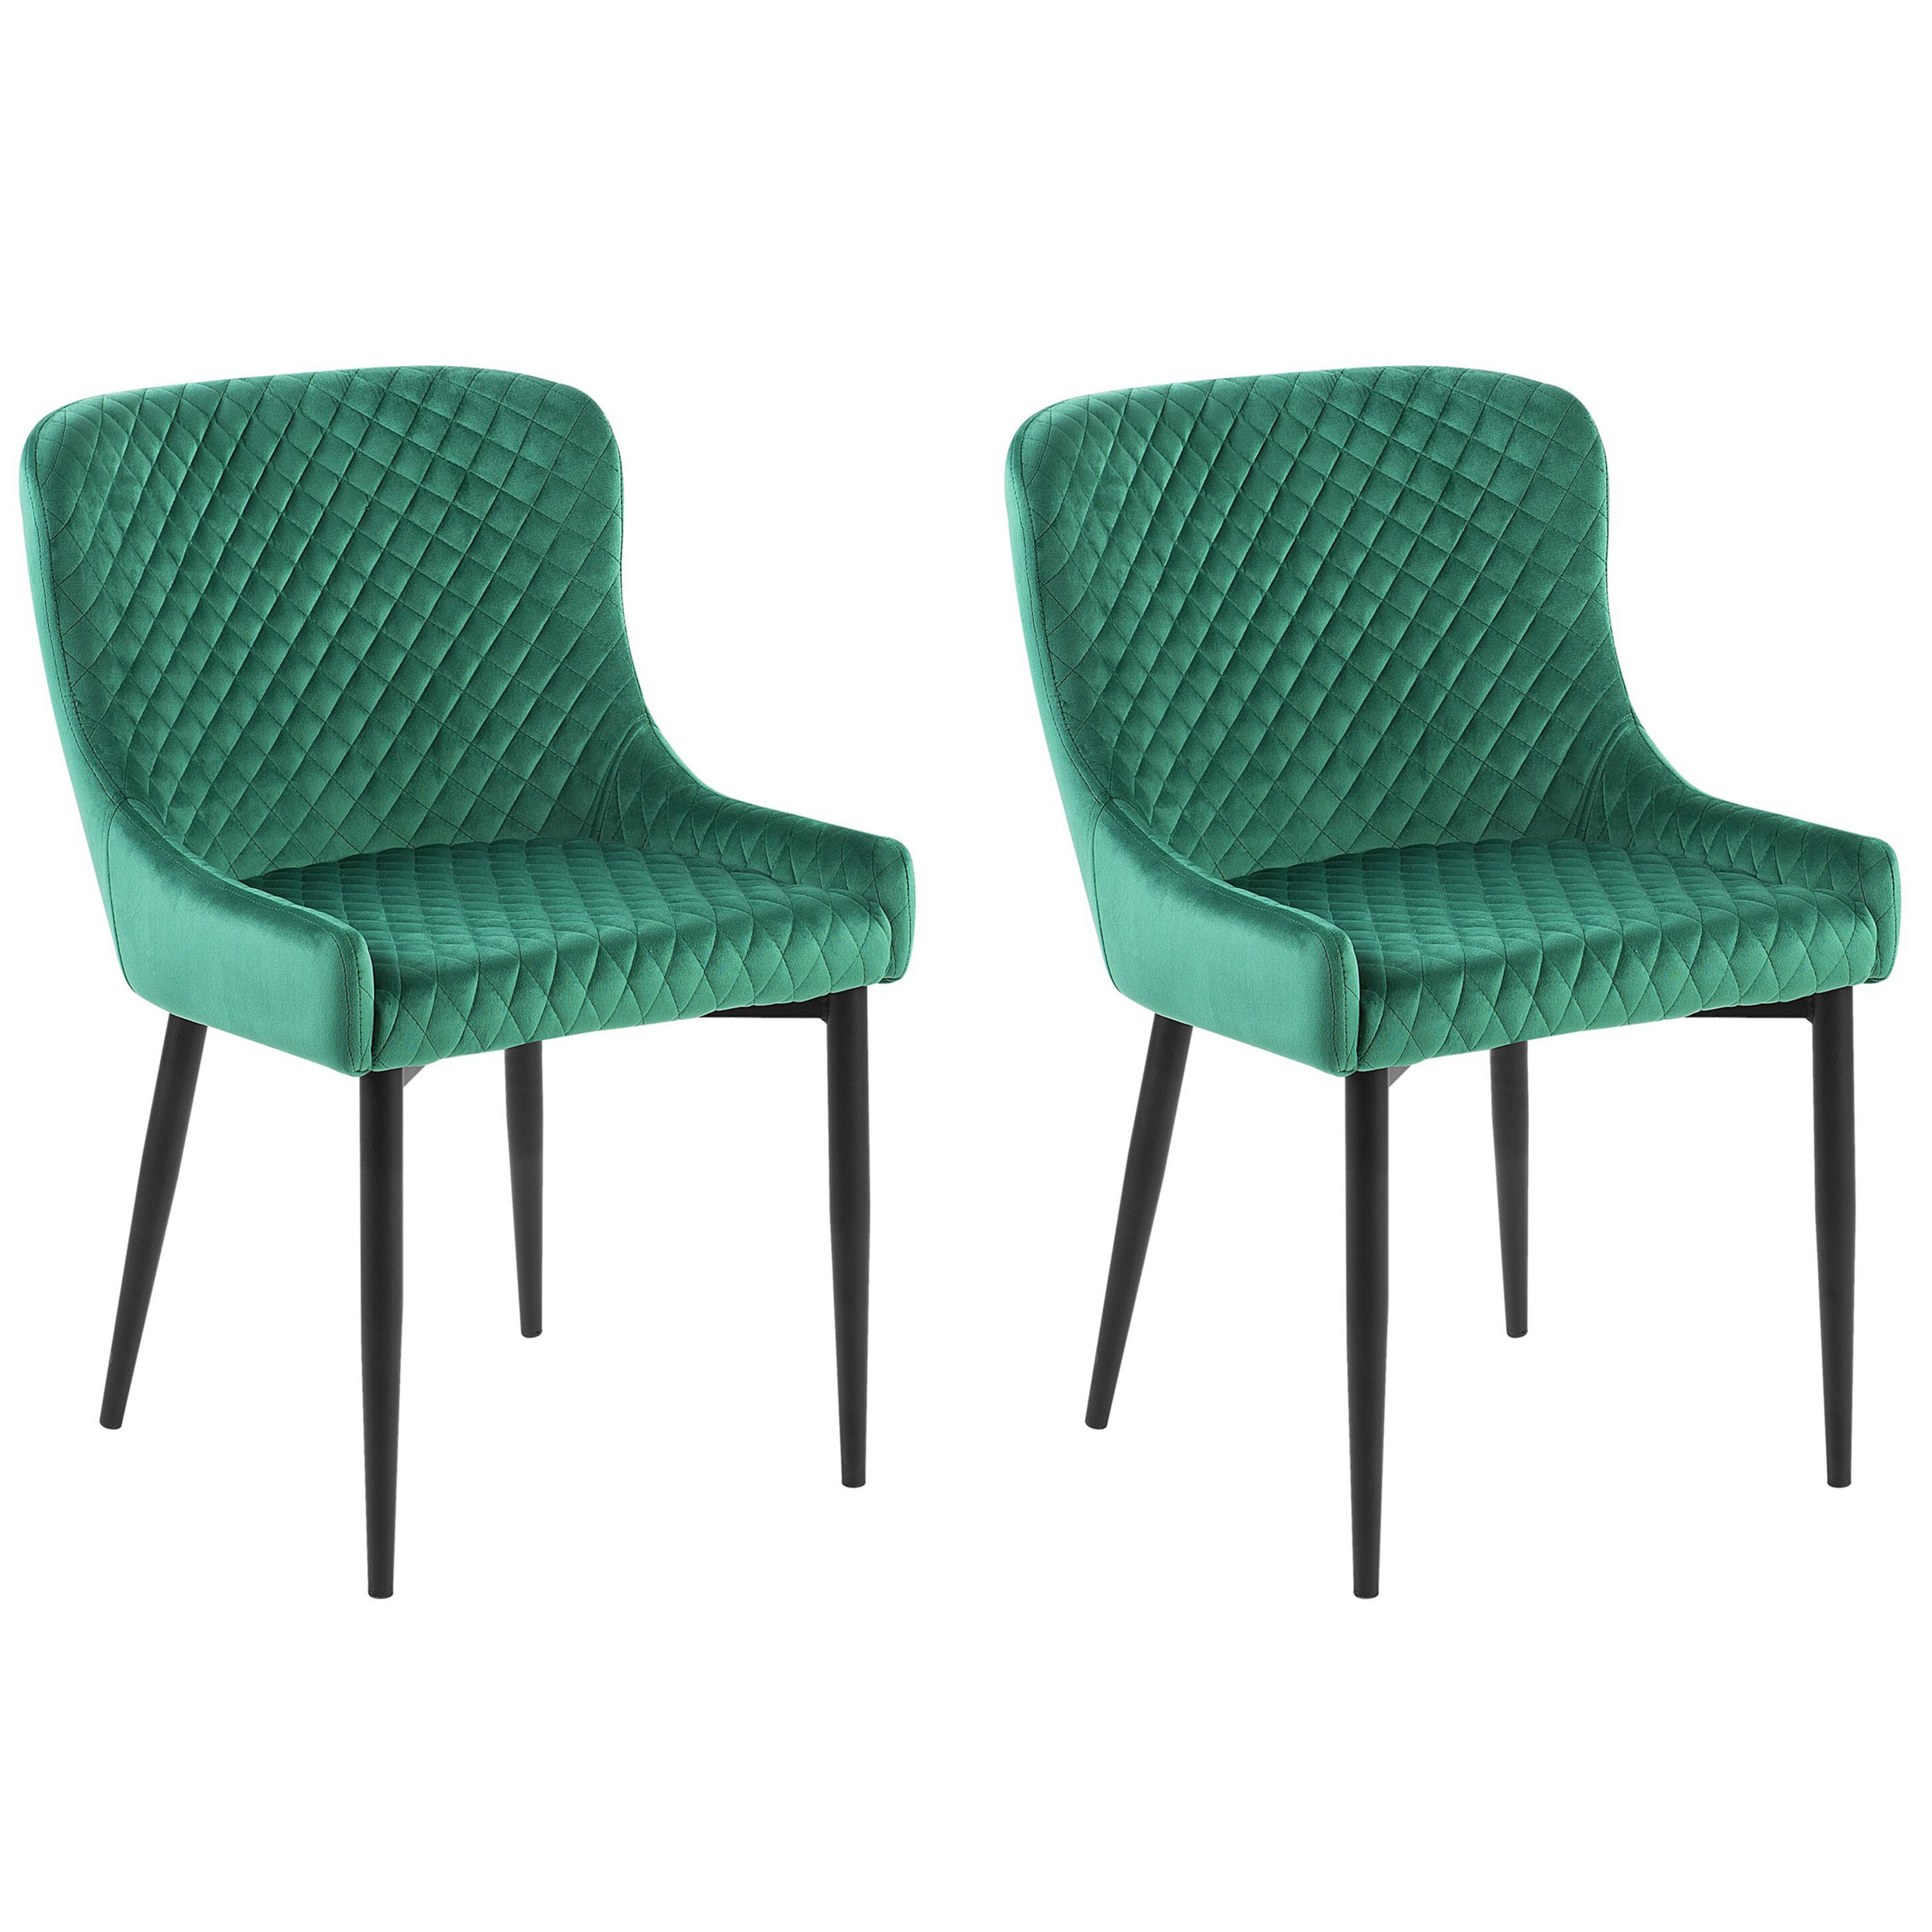 Beliani Set of 2 Dining Chairs Green Velvet Upholstered Quilted